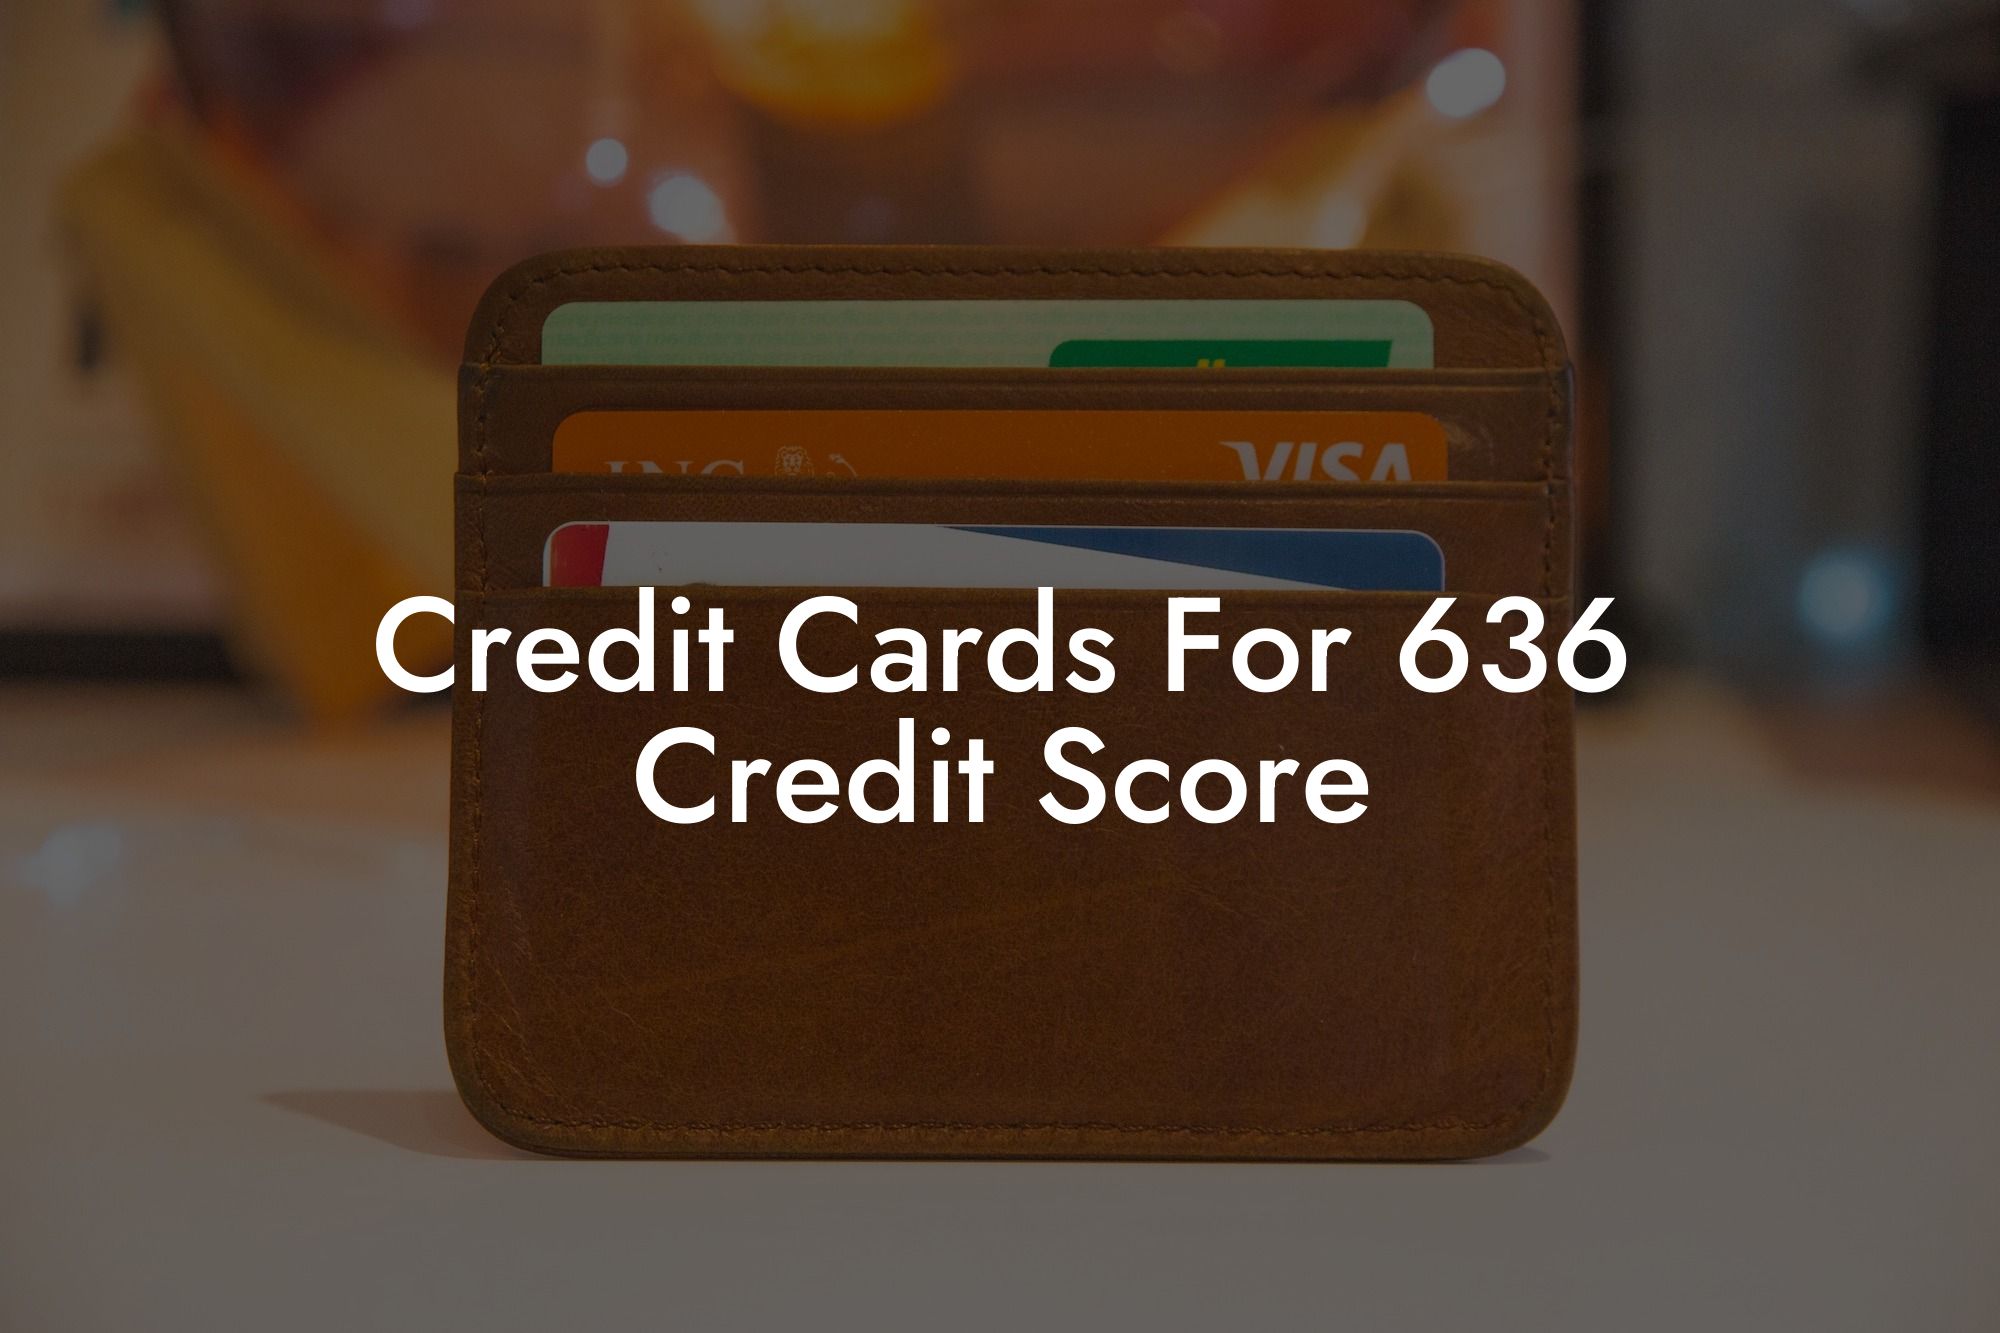 Credit Cards For 636 Credit Score